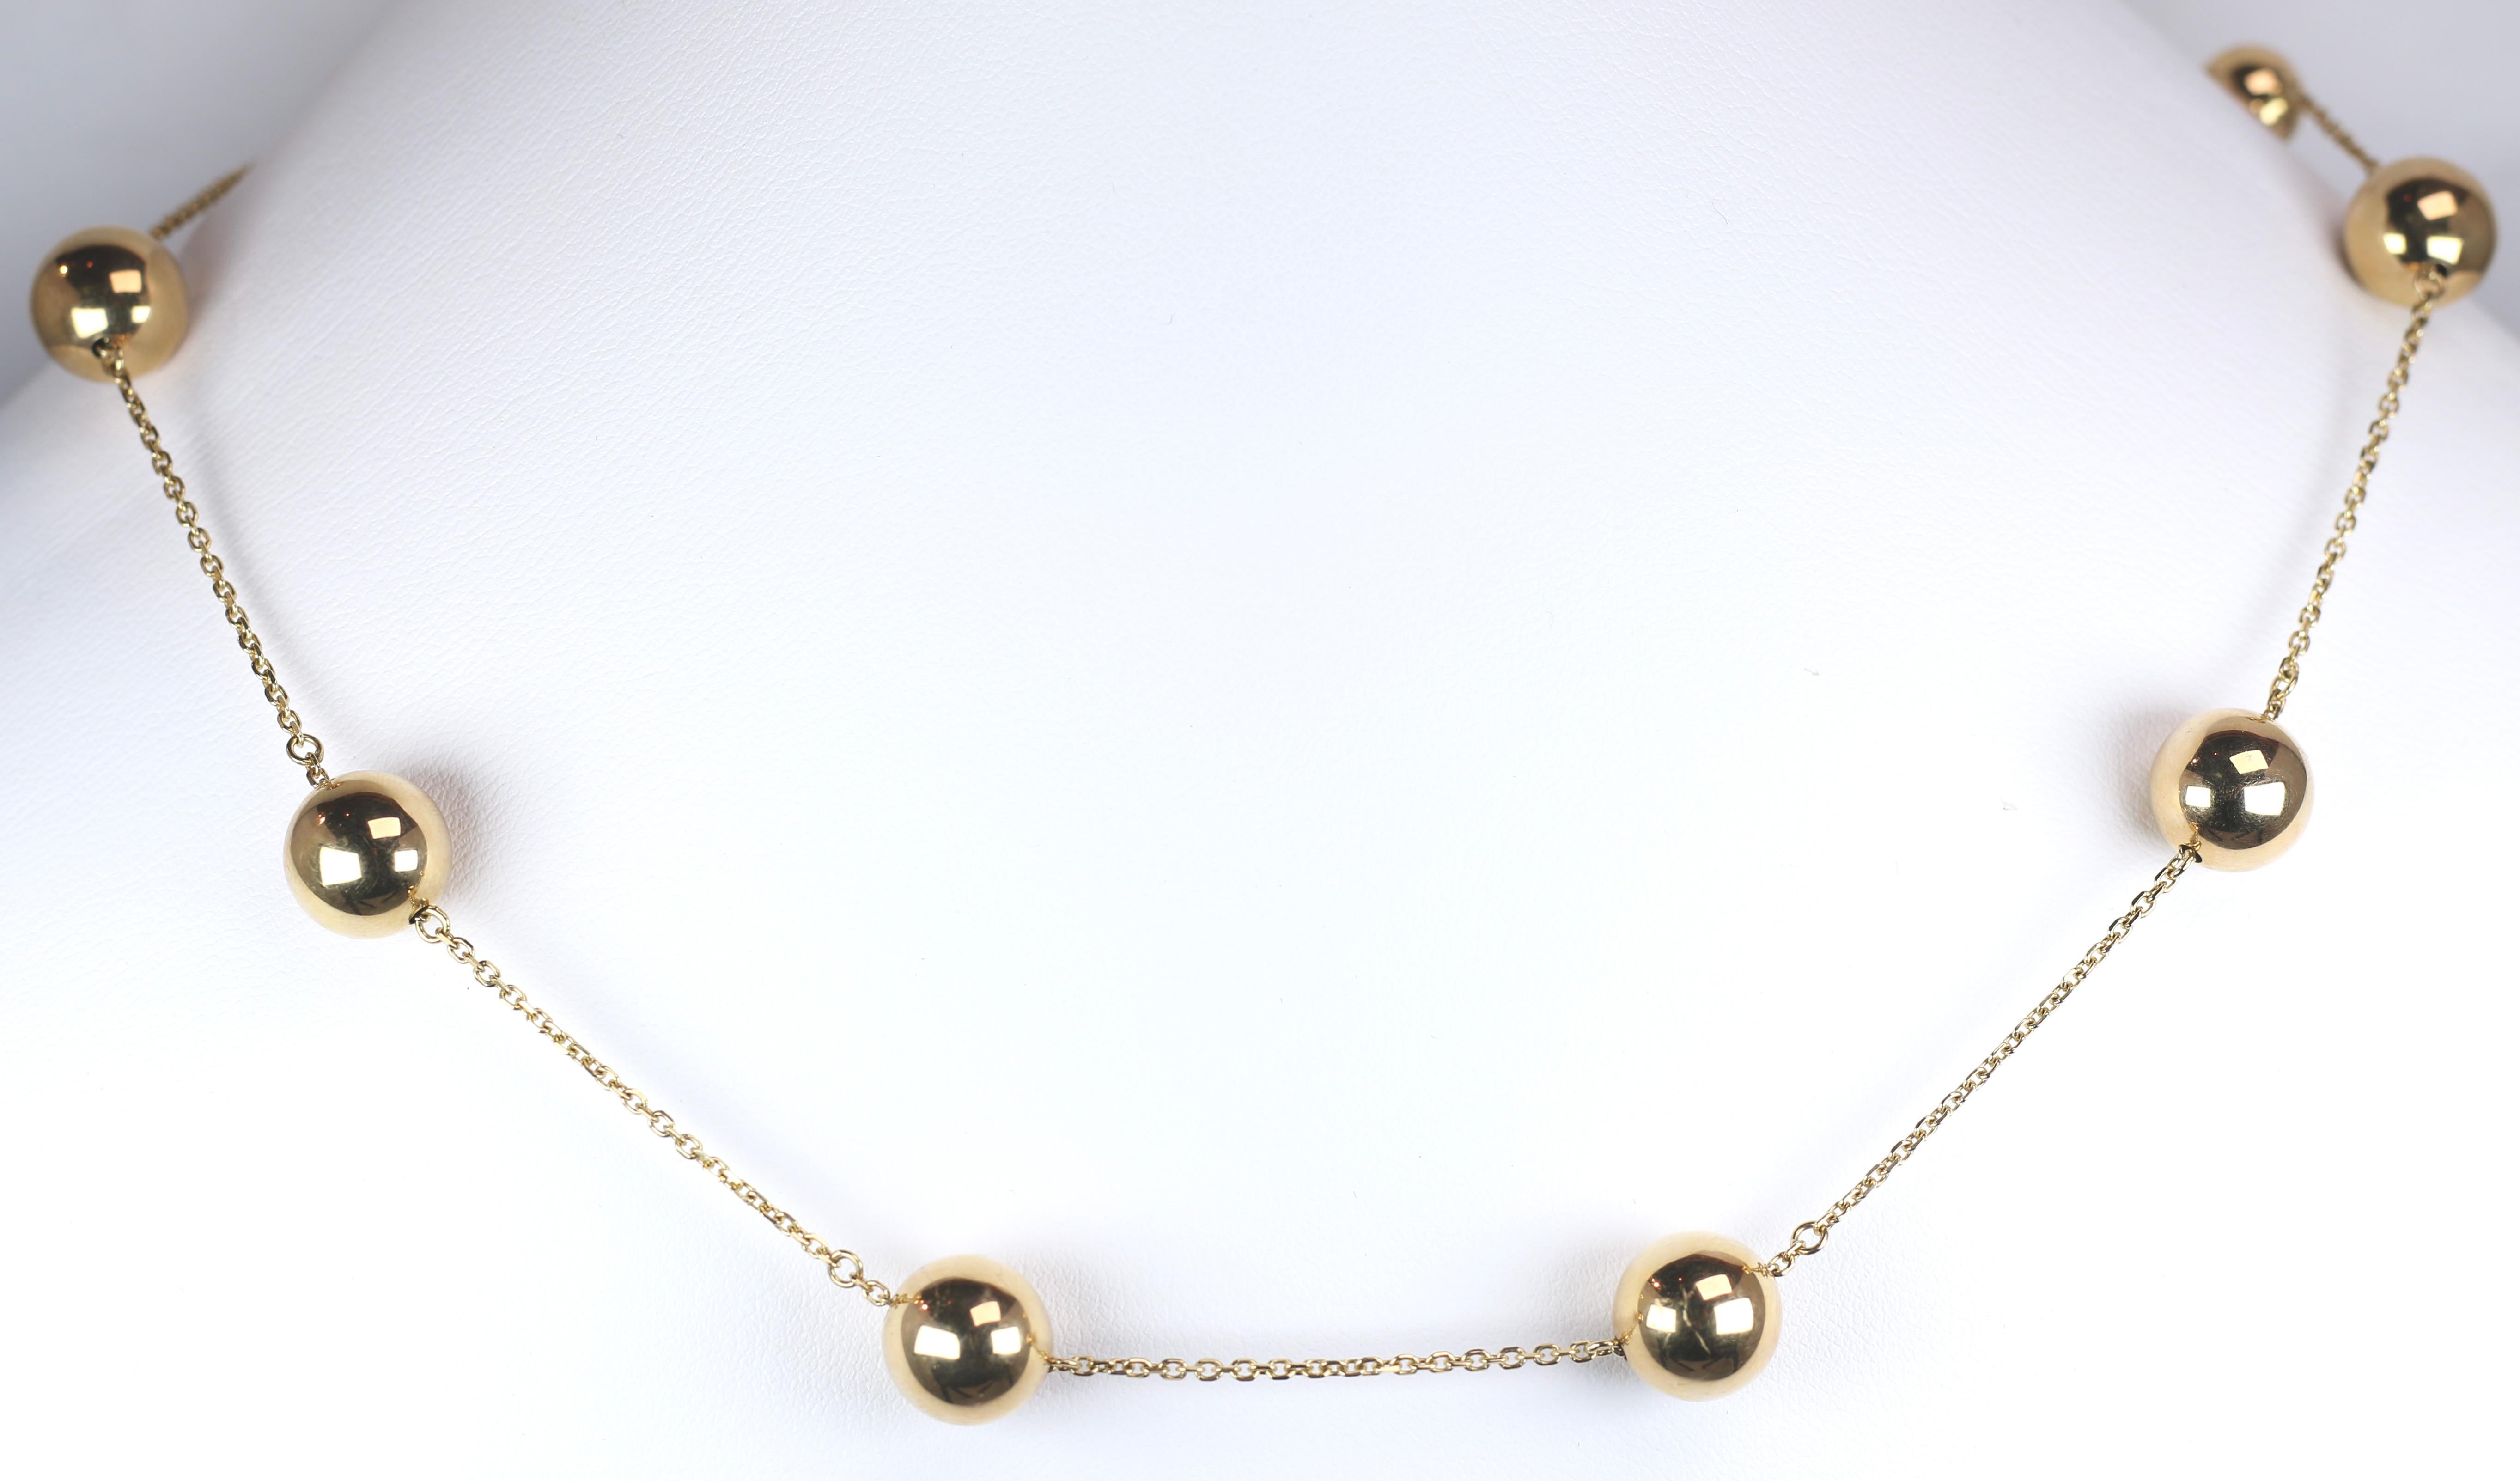 This Classically gorgeous Roberto Coin Yellow Gold Necklace with Gold Balls is a fun pop of elegance on your neck. Being roberto Coin it of course comes Featuring the Signature Hidden Ruby in the Clasp area.  A gorgeous piece to accentuate your